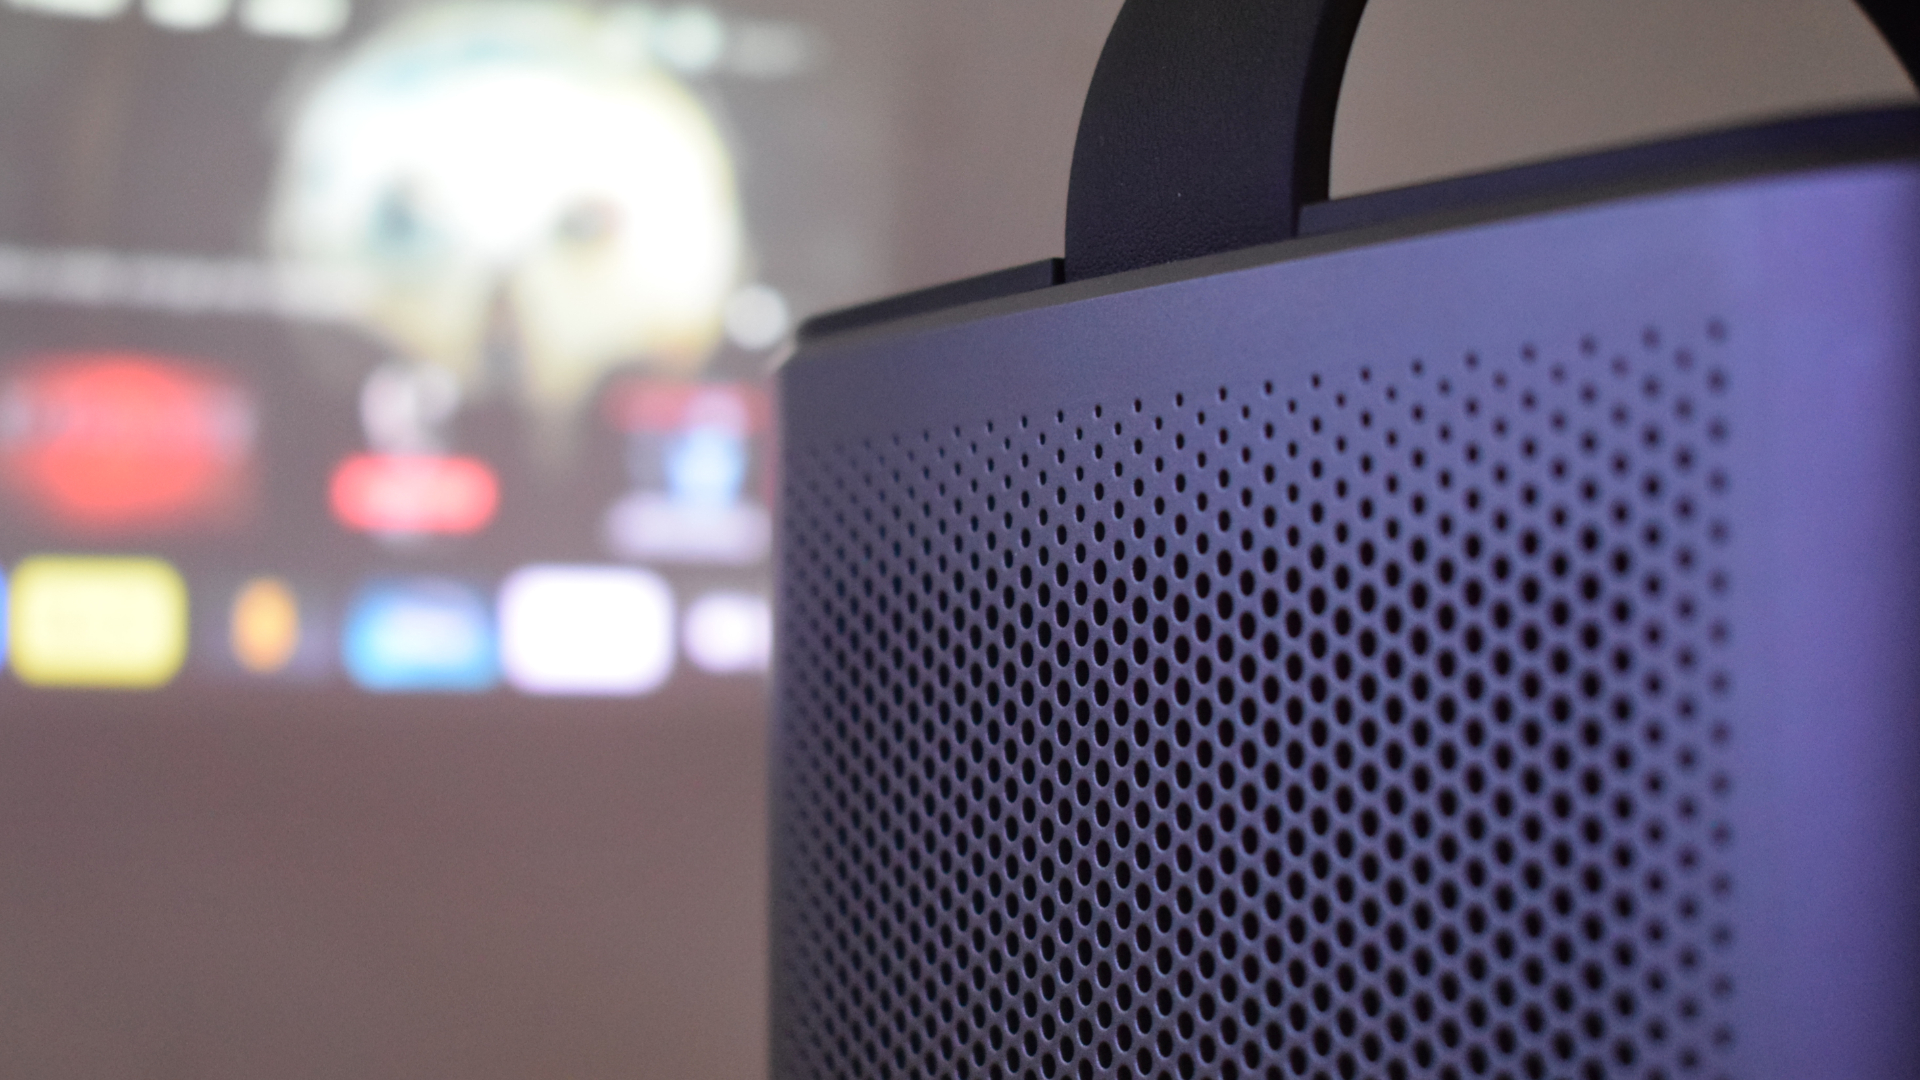 Anker Nebula Mars 3 Air projector side speaker grille close-up with projected image in background